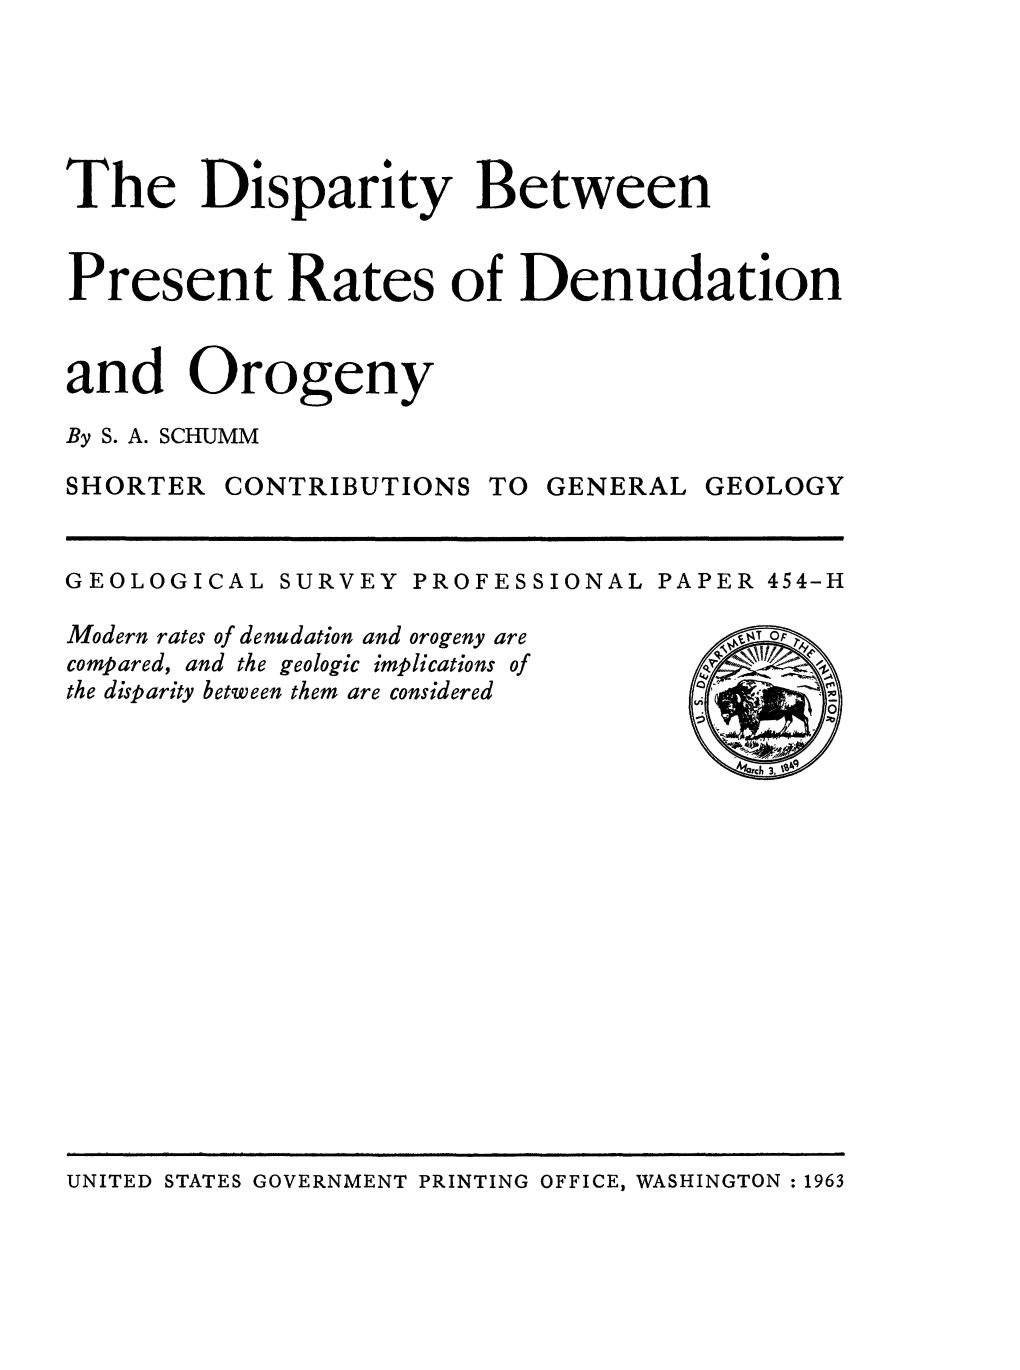 The Disparity Between Present Rates of Denudation and Orogeny by S